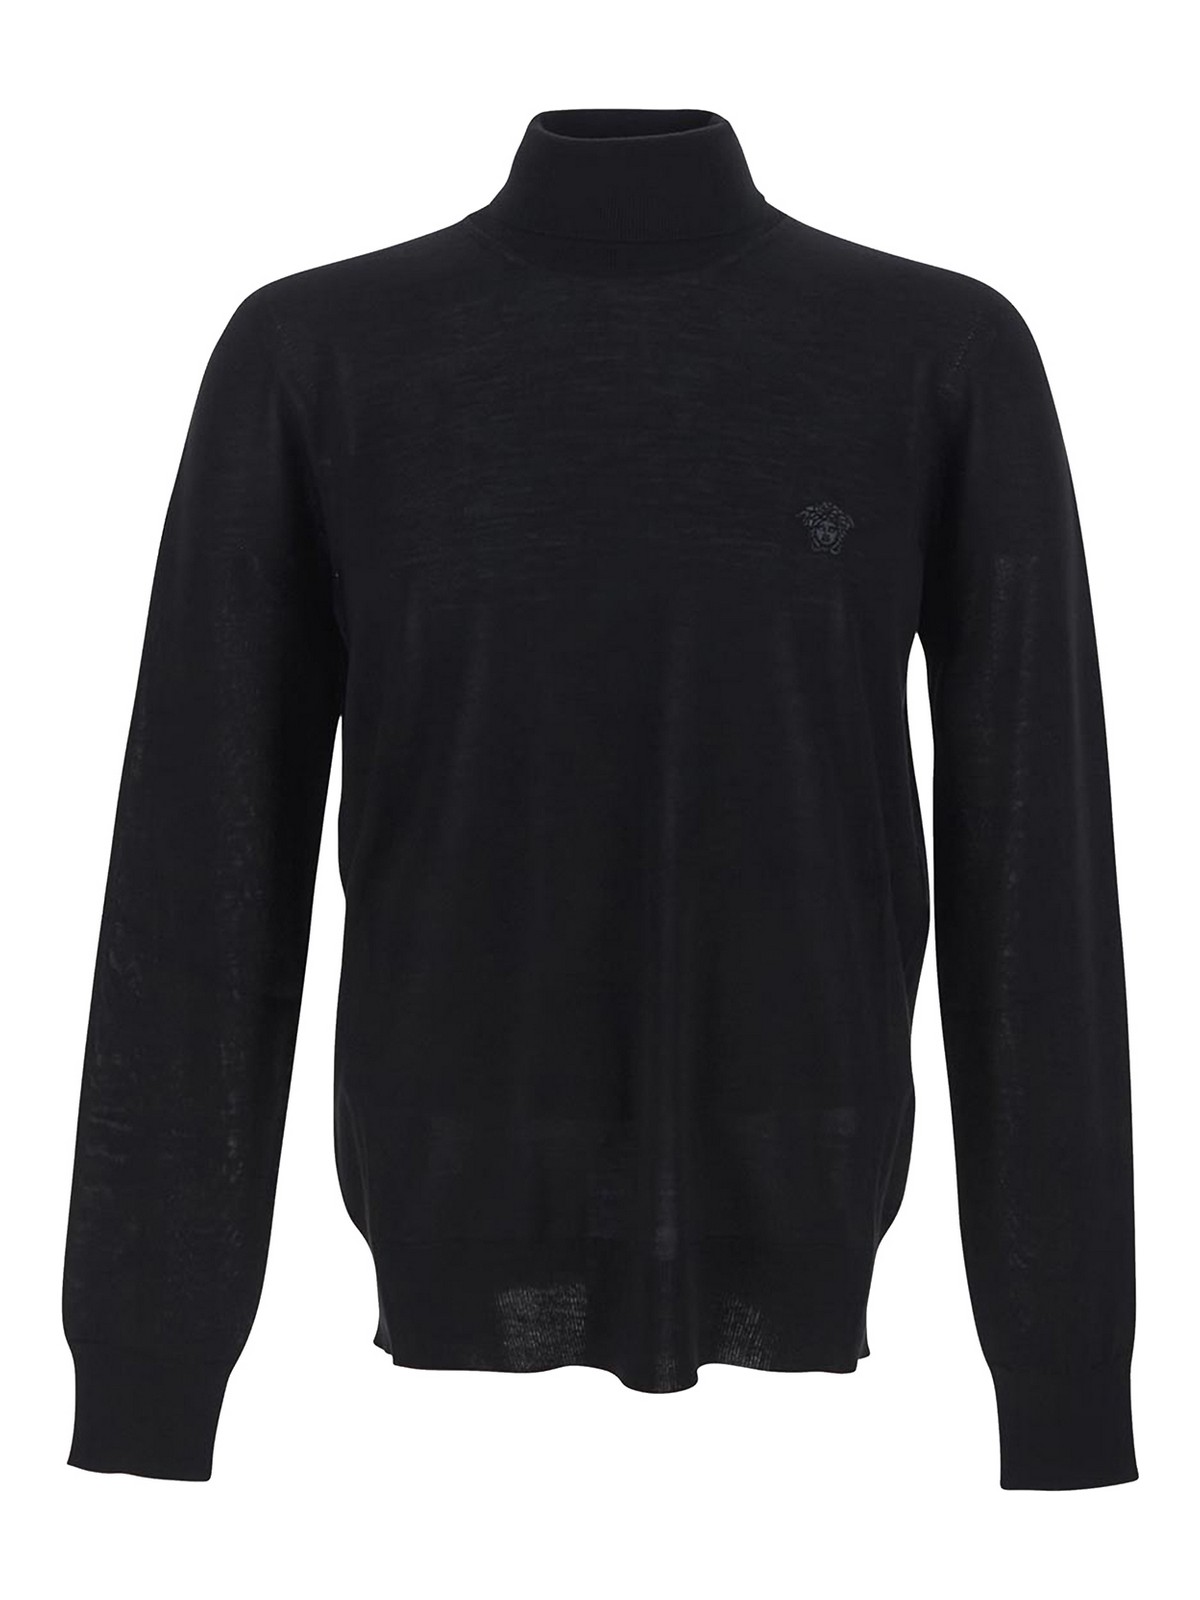 Versace Jeans Couture Crewneck In Black